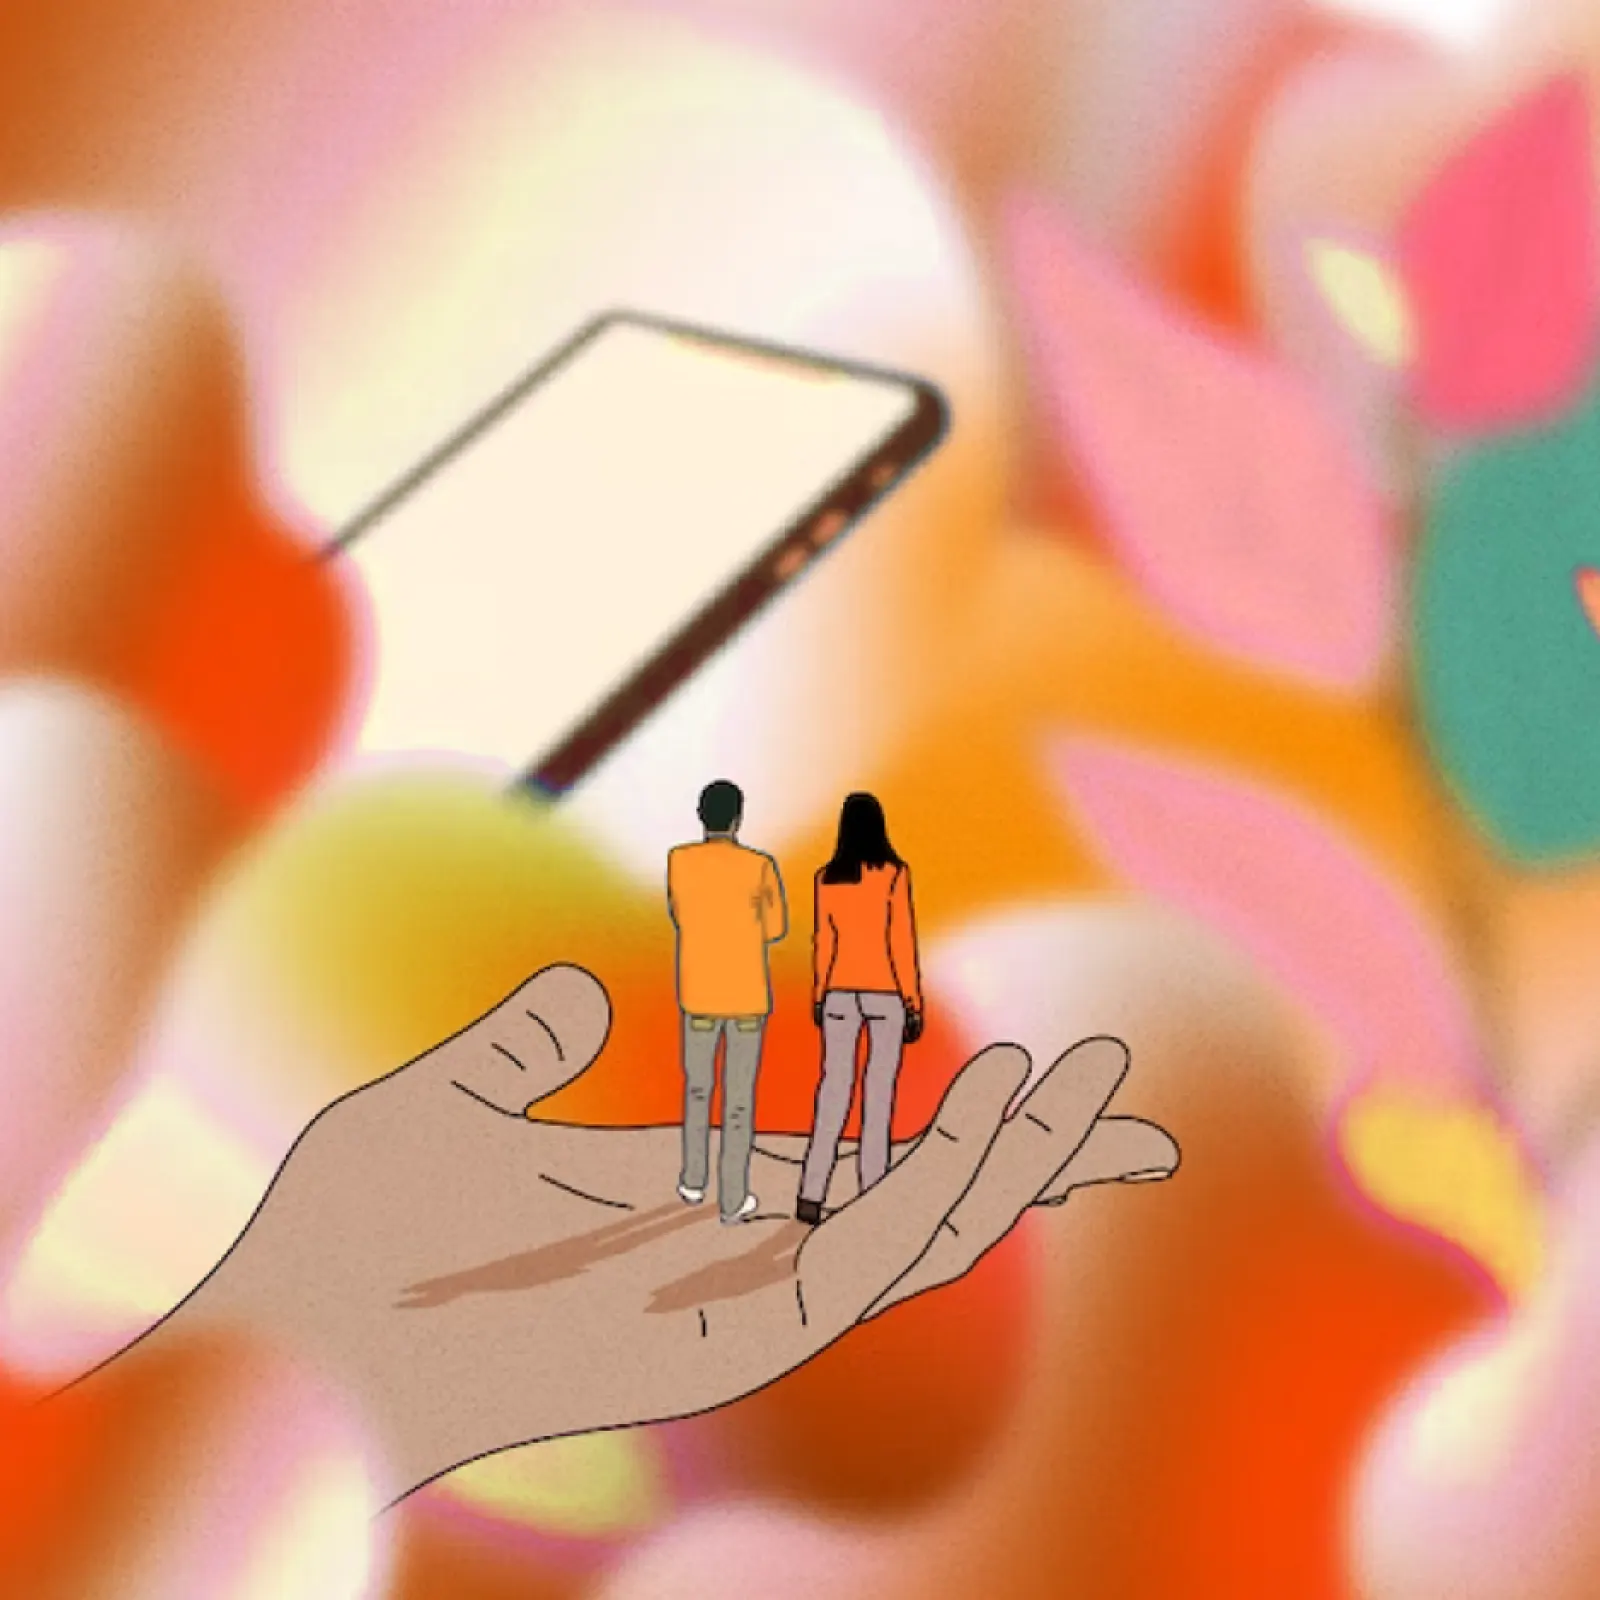 Two tiny people on a human hand - Using Digital as a Platform for Good (Idea Page)